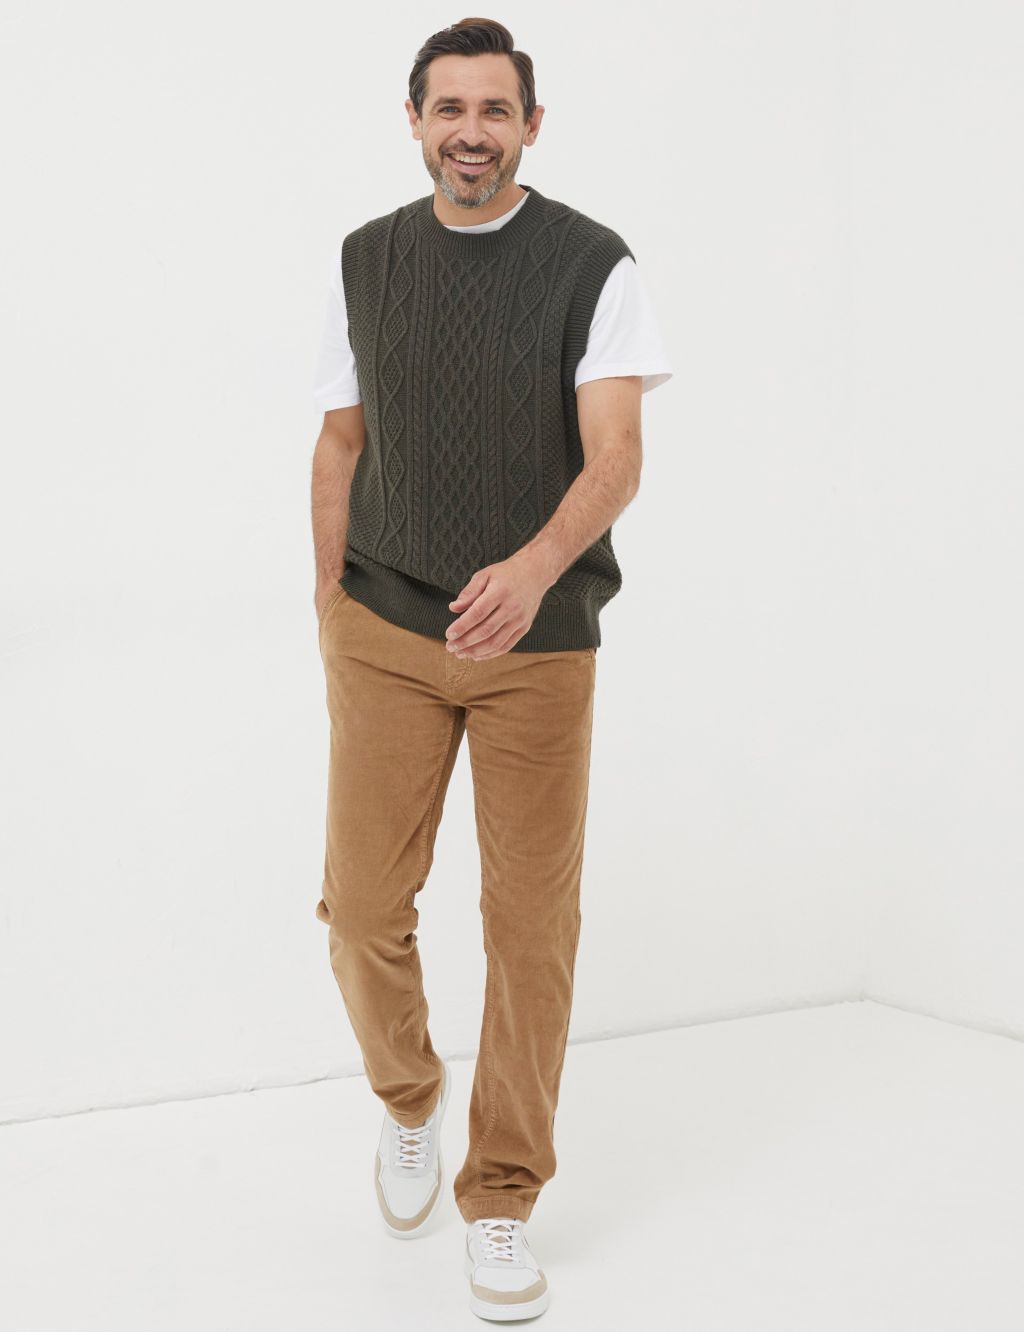 Straight Fit Corduroy Trousers image 1